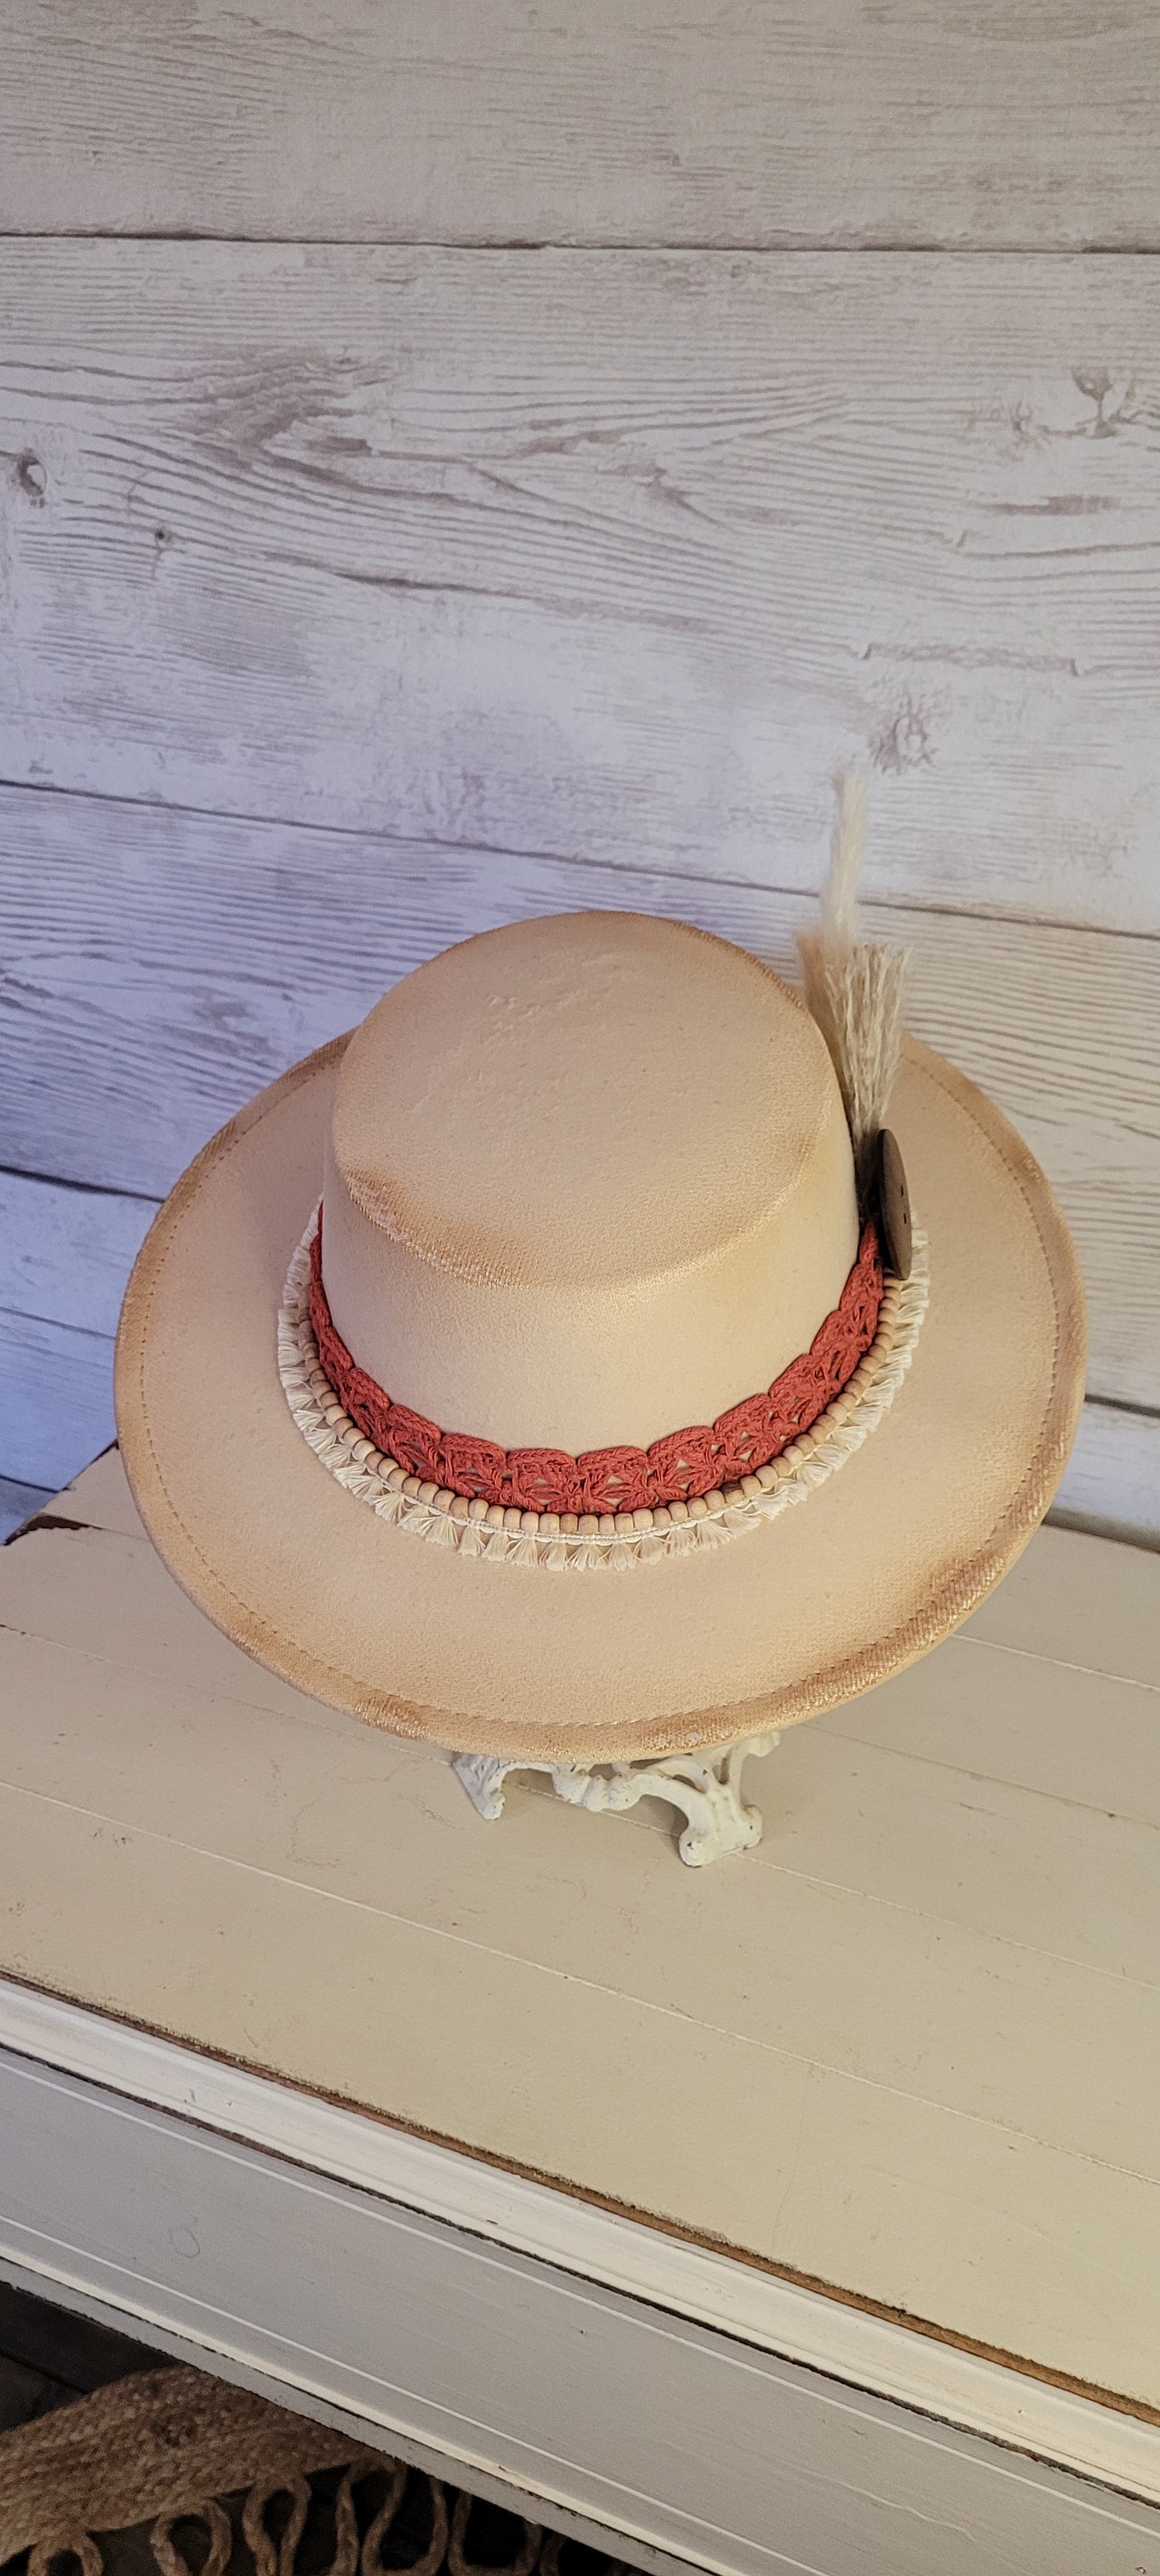 Lace ribbon, tassel ribbon, wooden bead band, button, & pampas Felt hat Flat brim 100% polyester Ribbon drawstring for hat size adjustment Head Circumference: 24" Crown Height: 3.5" Brim Length: 13.5" Brim Width: 12.75" Branded & numbered inside crown Custom burned by Kayla